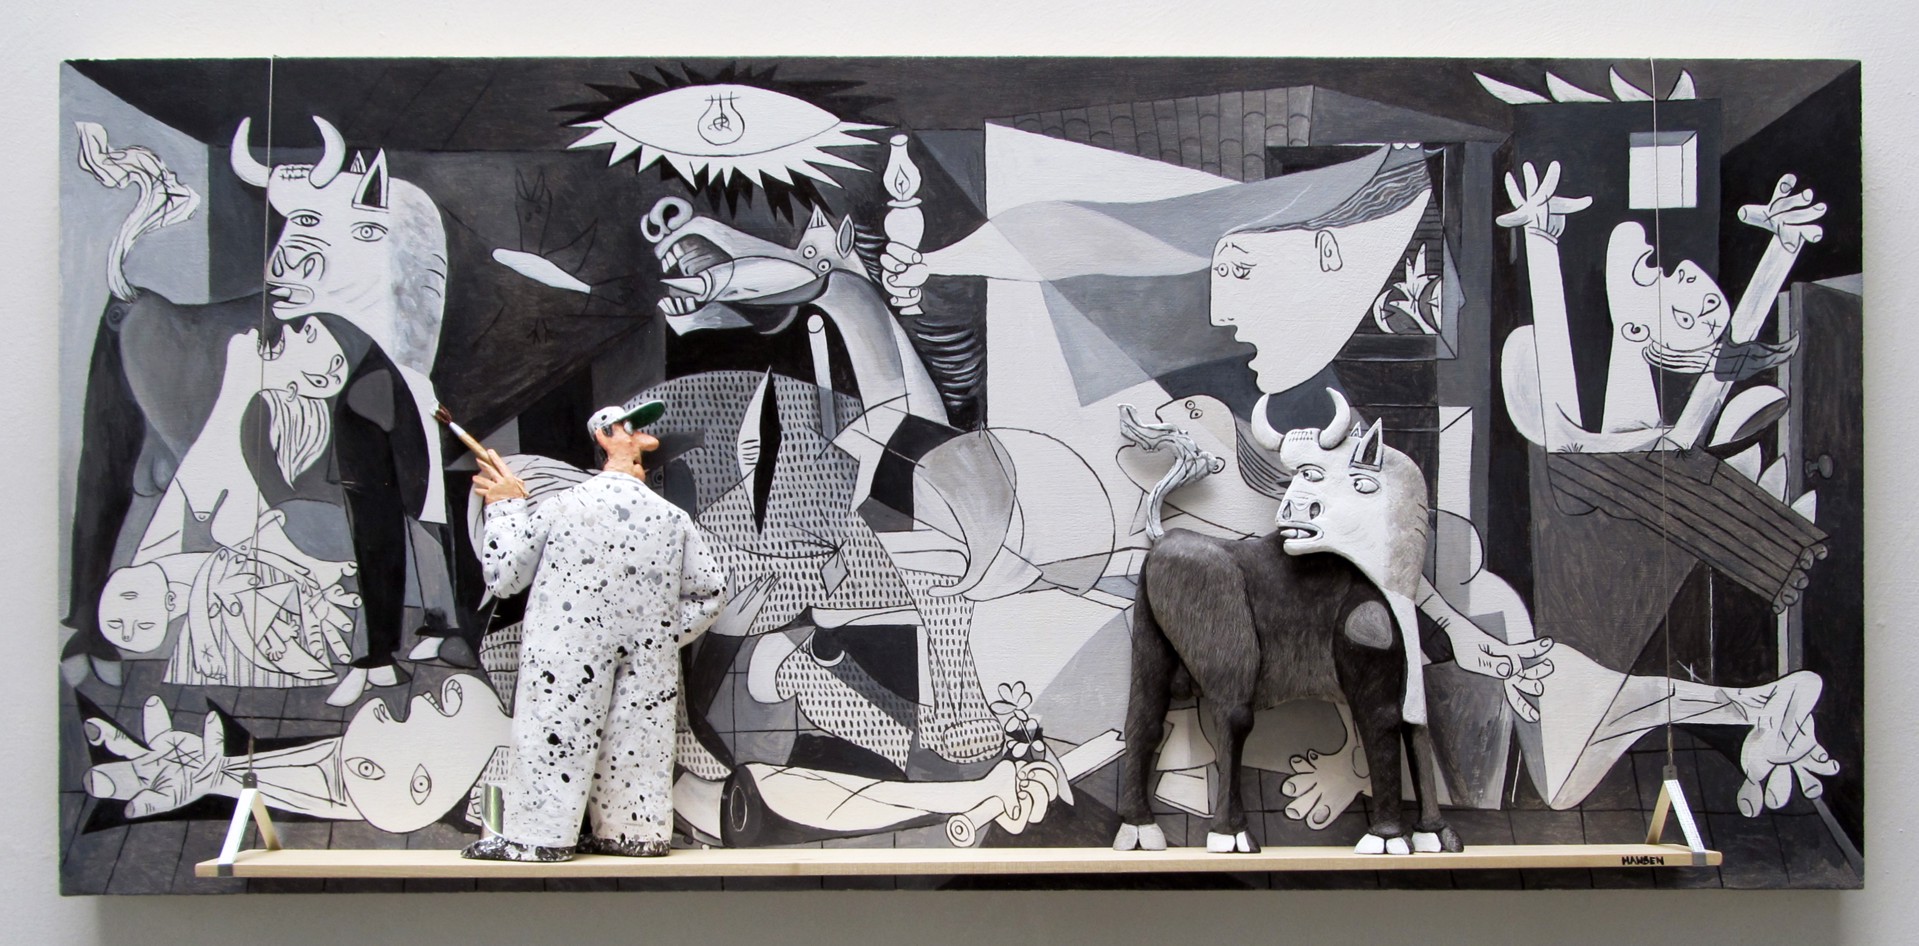 Guernica, 1937 by mix media artist Stephen Hansen is a fun tribute to Pablo Picasso's original of the same title. 